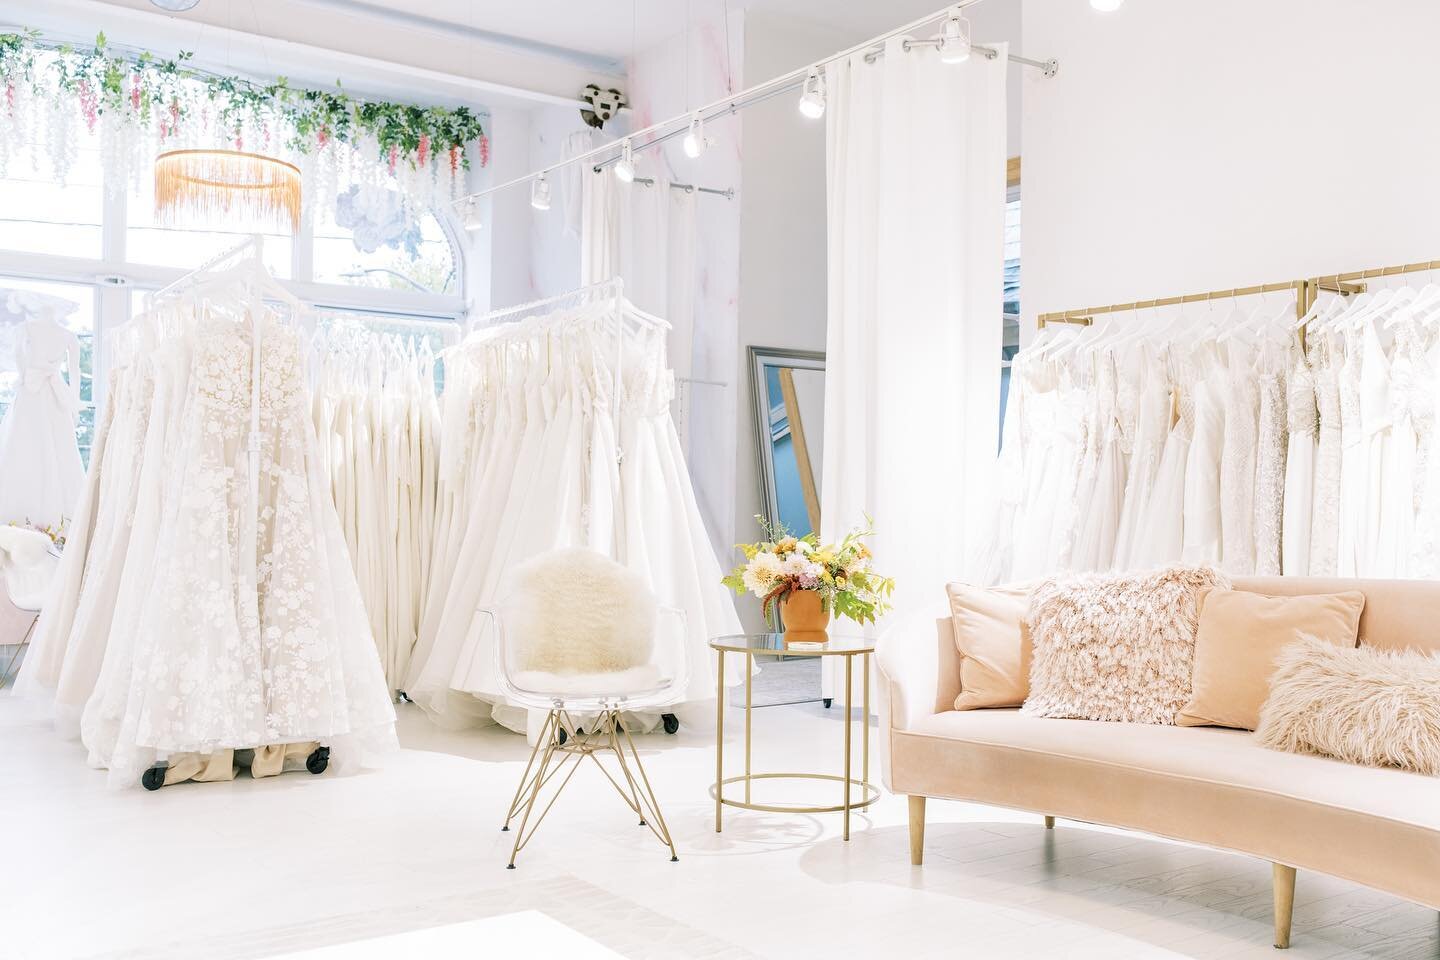 A peek into our magical ✨ #pittsburgh boutique! Brides, we only have a few bridal appointments left for the year. Snag yours today! 🥂🤍 We can&rsquo;t wait to celebrate your &ldquo;Yes&rdquo; moments with you! #blancdeblancbridal #blancdeblancpgh #b